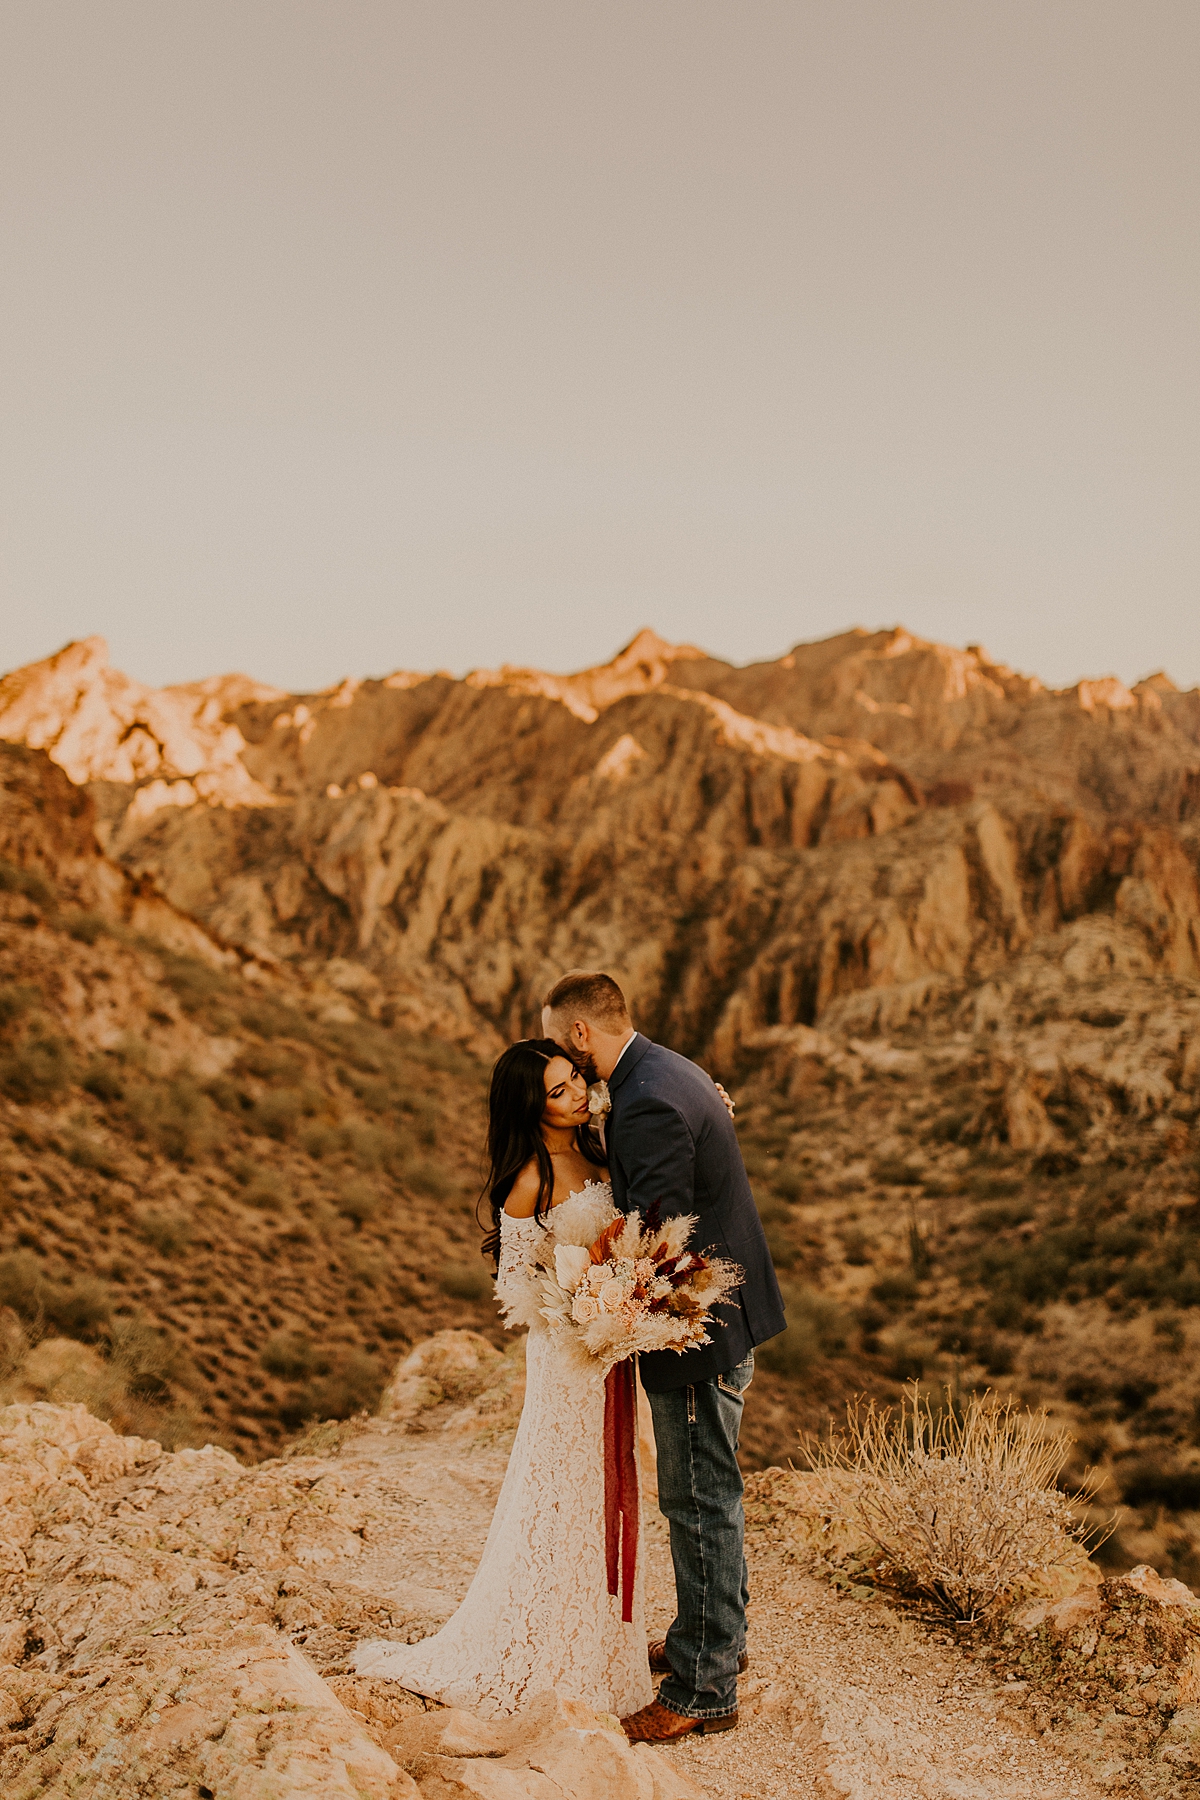 Intimate-elopement-in-superstition-mountain-wilderness-allison-slater-photography78.jpg